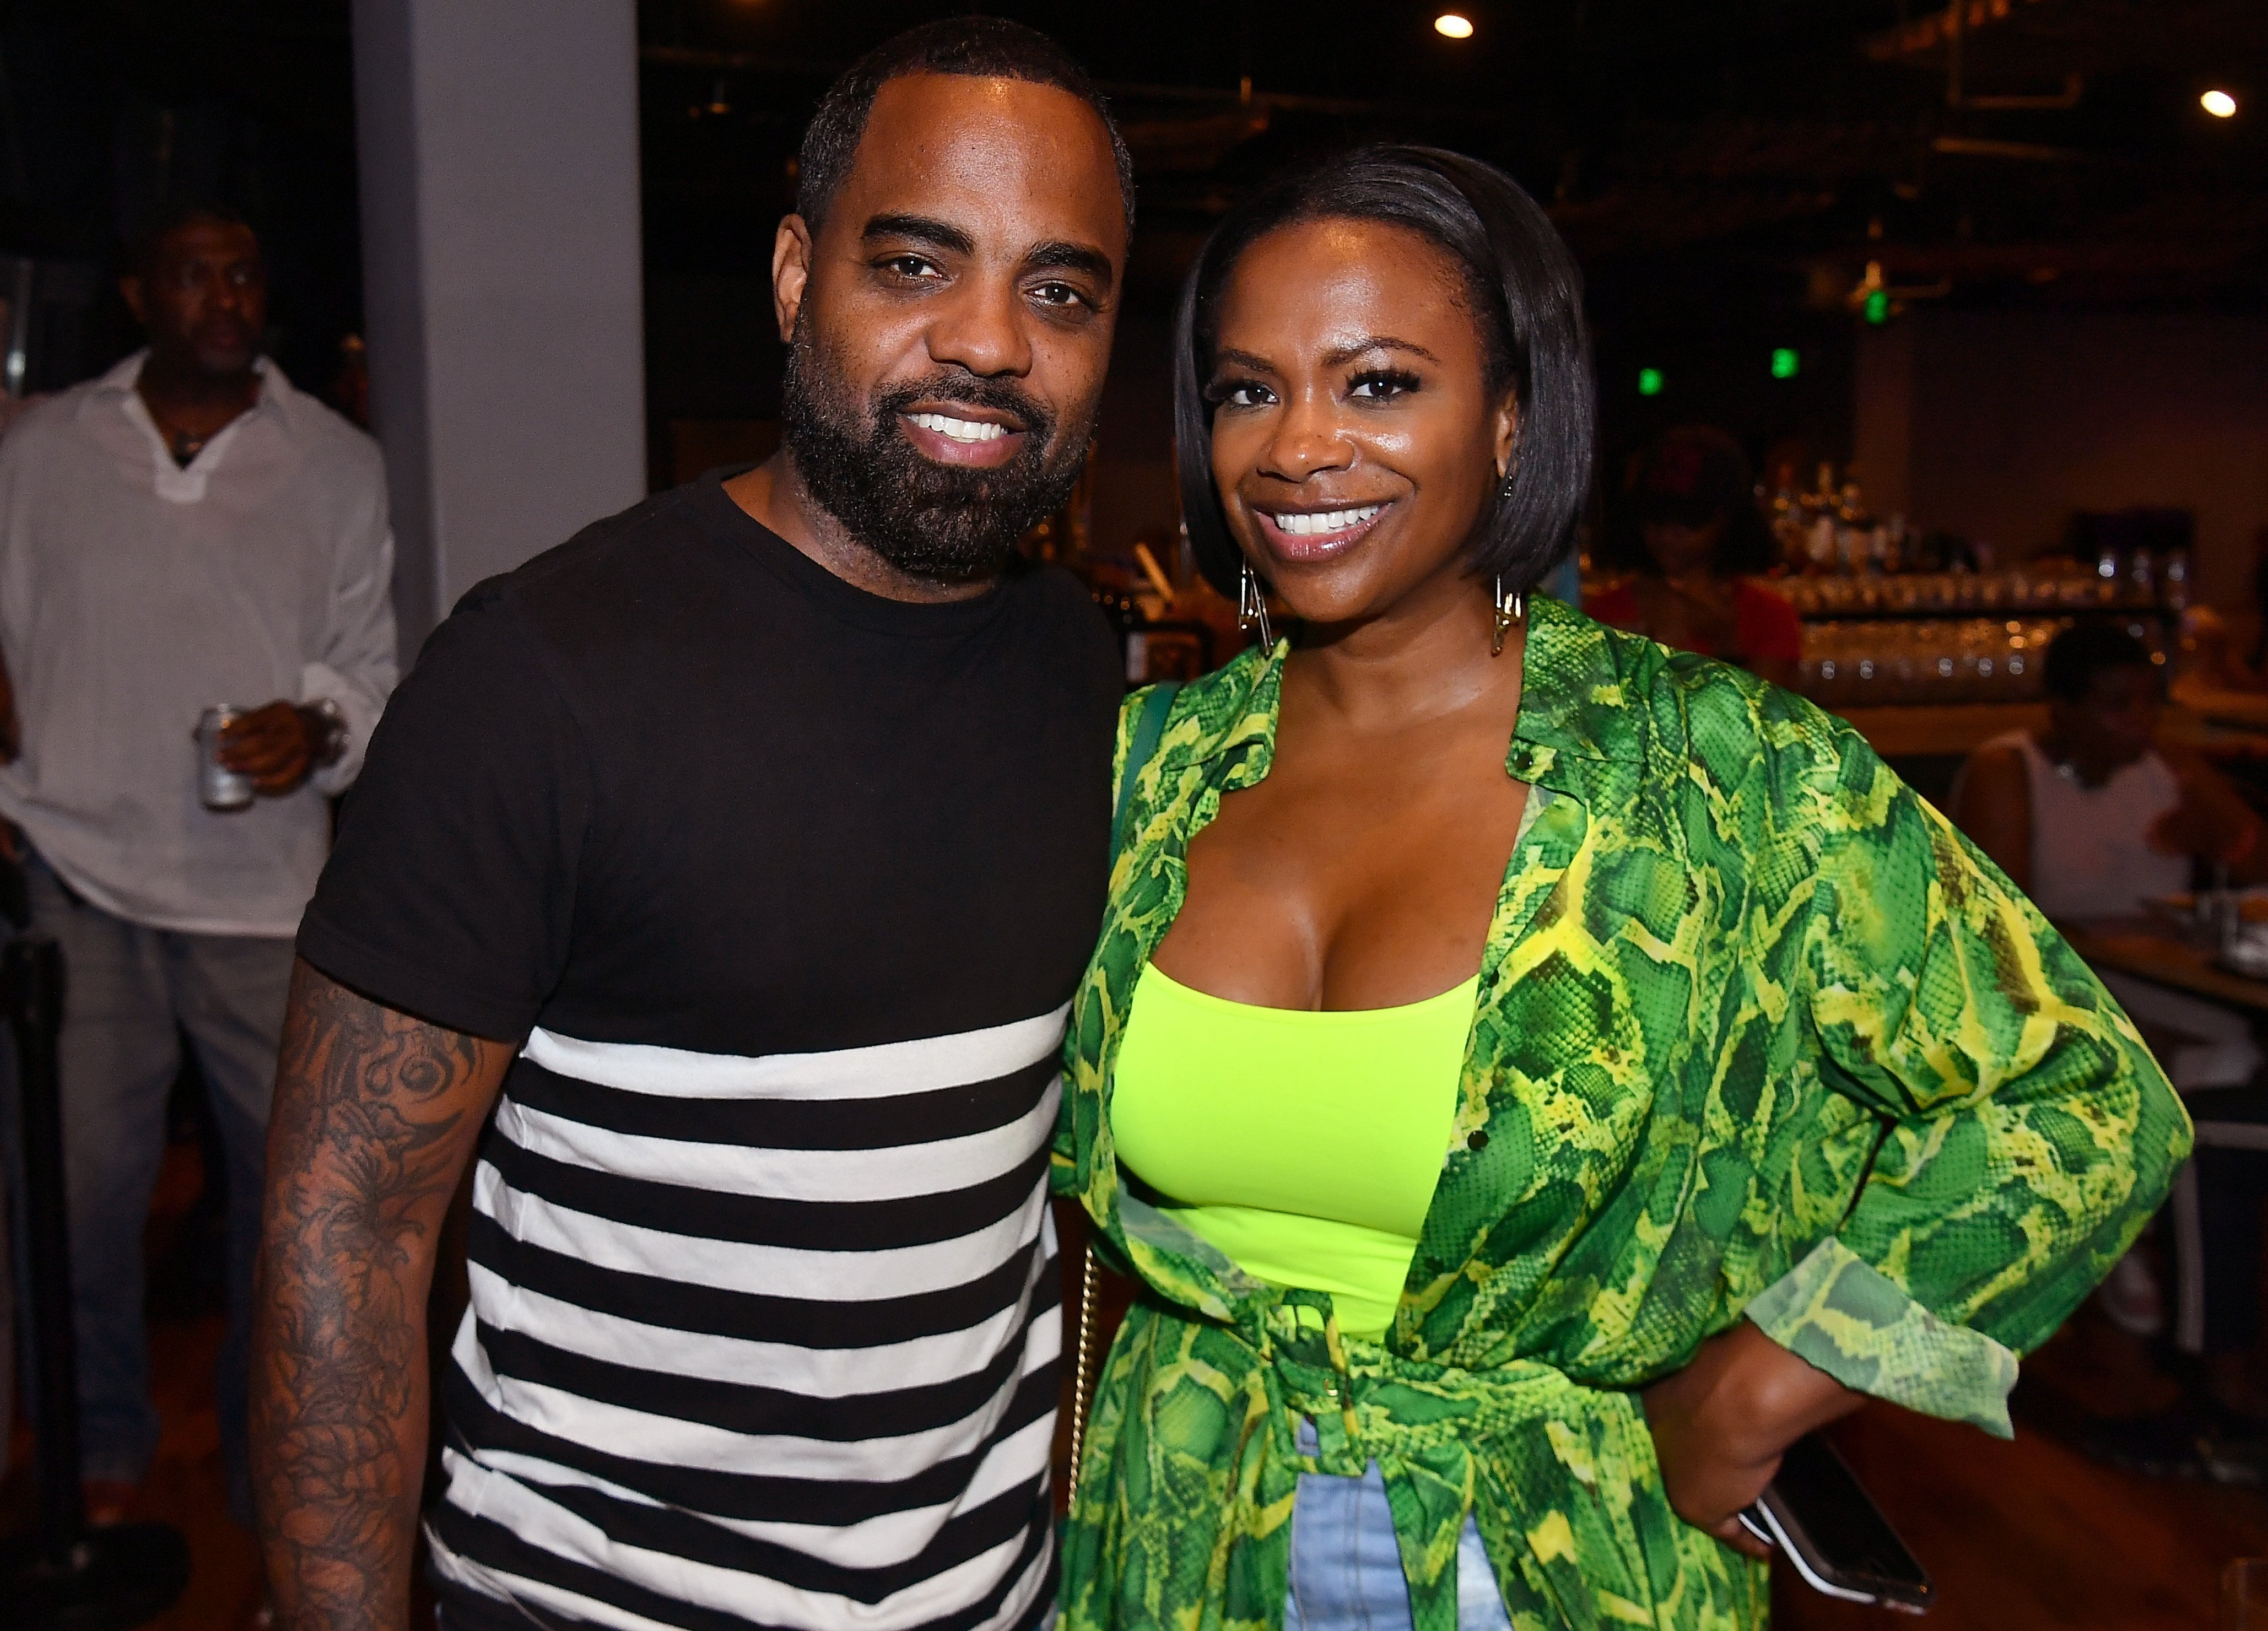 Kandi Burruss and husband Todd Tucker pose in a Majic 107.5 event in Atlanta in September 2019. | Source: Getty Images